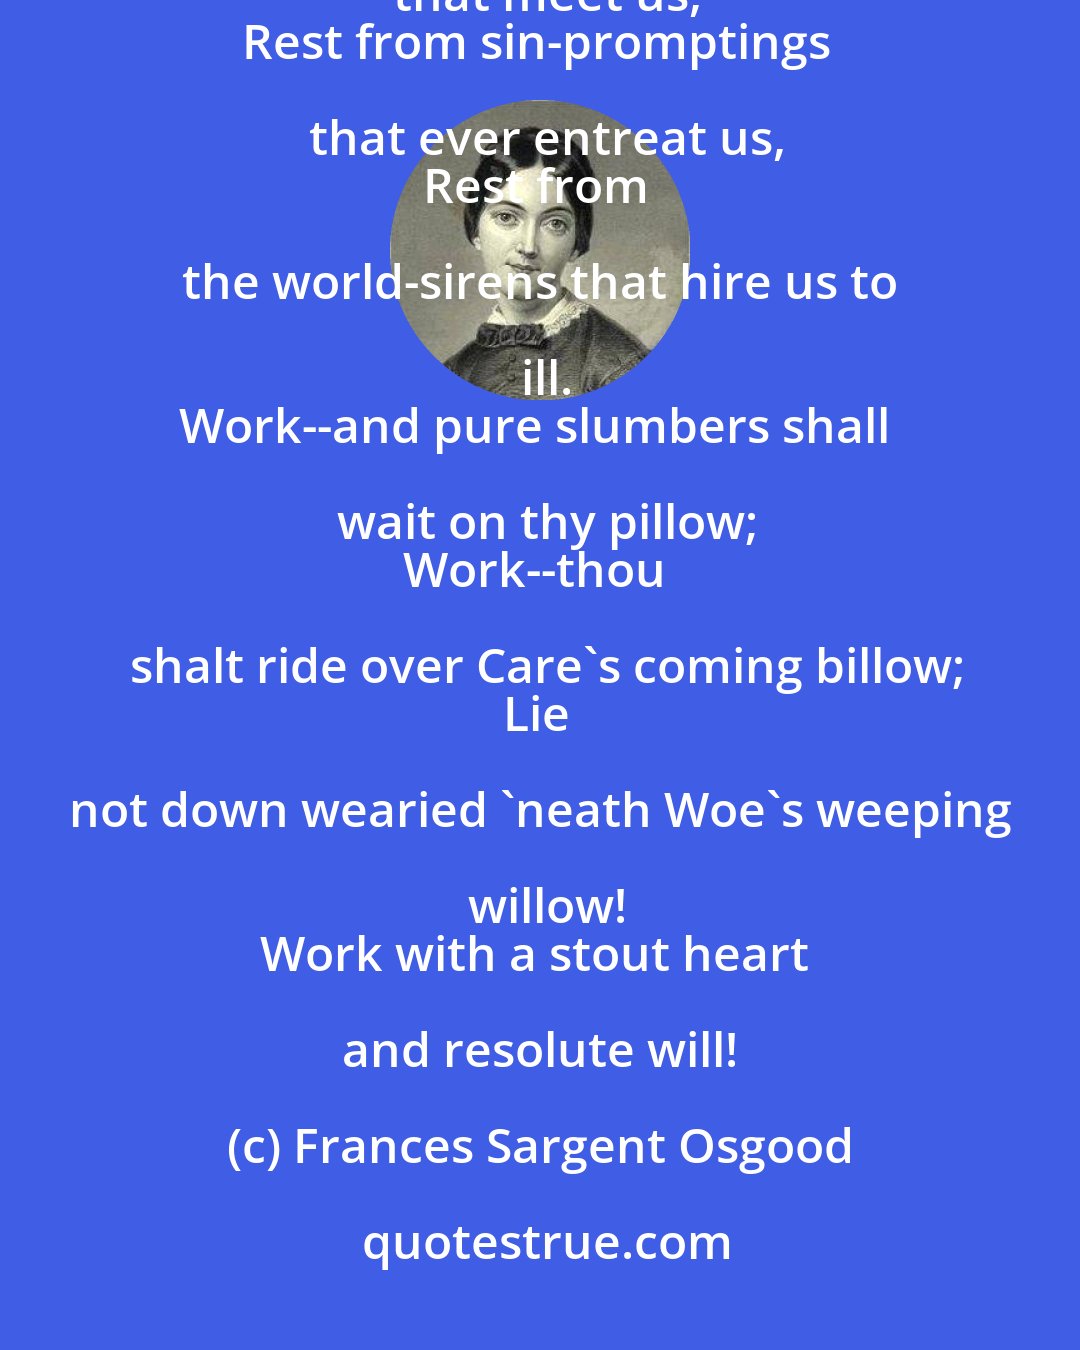 Frances Sargent Osgood: Labor is rest--from the sorrow that greet us;
Rest from all petty vexations that meet us,
Rest from sin-promptings that ever entreat us,
Rest from the world-sirens that hire us to ill.
Work--and pure slumbers shall wait on thy pillow;
Work--thou shalt ride over Care's coming billow;
Lie not down wearied 'neath Woe's weeping willow!
Work with a stout heart and resolute will!